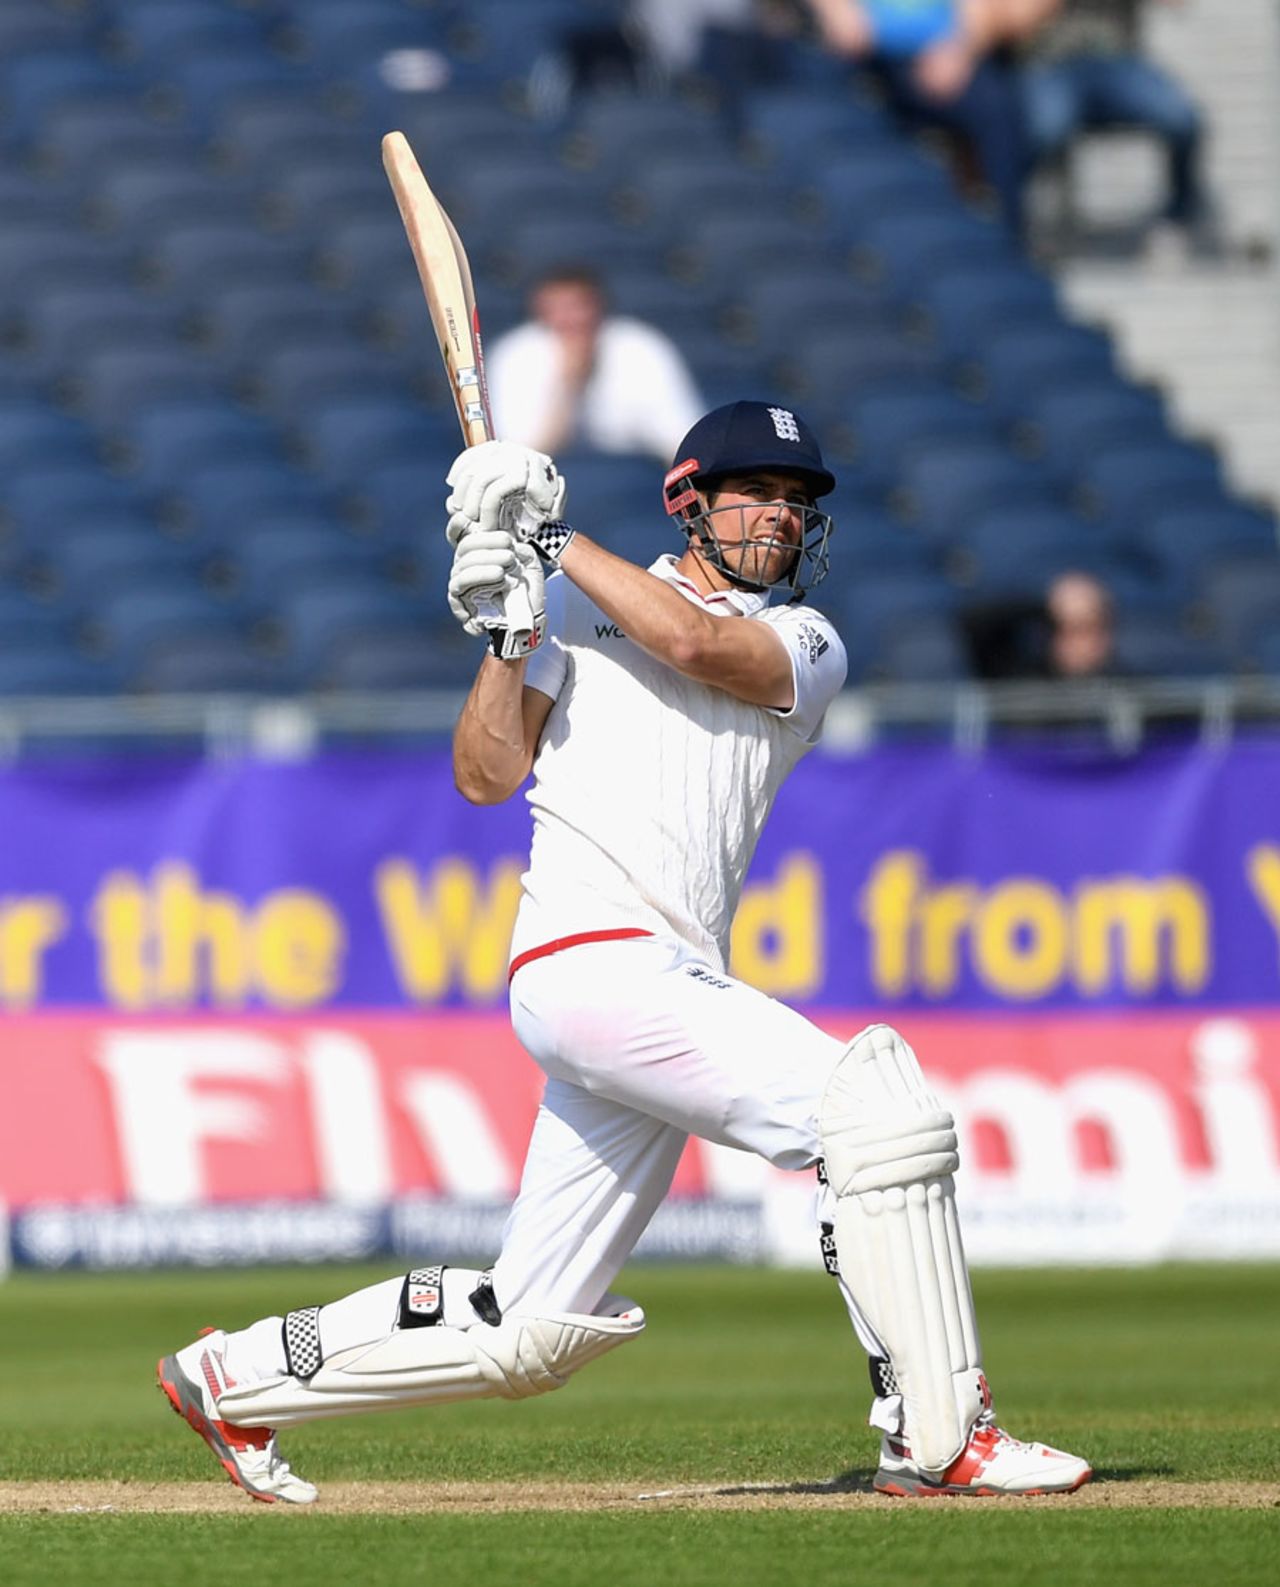 Alastair Cook finished unbeaten on 47, England v Sri Lanka, 2nd Test, Chester-le-Street, 4th day, May 30, 2016